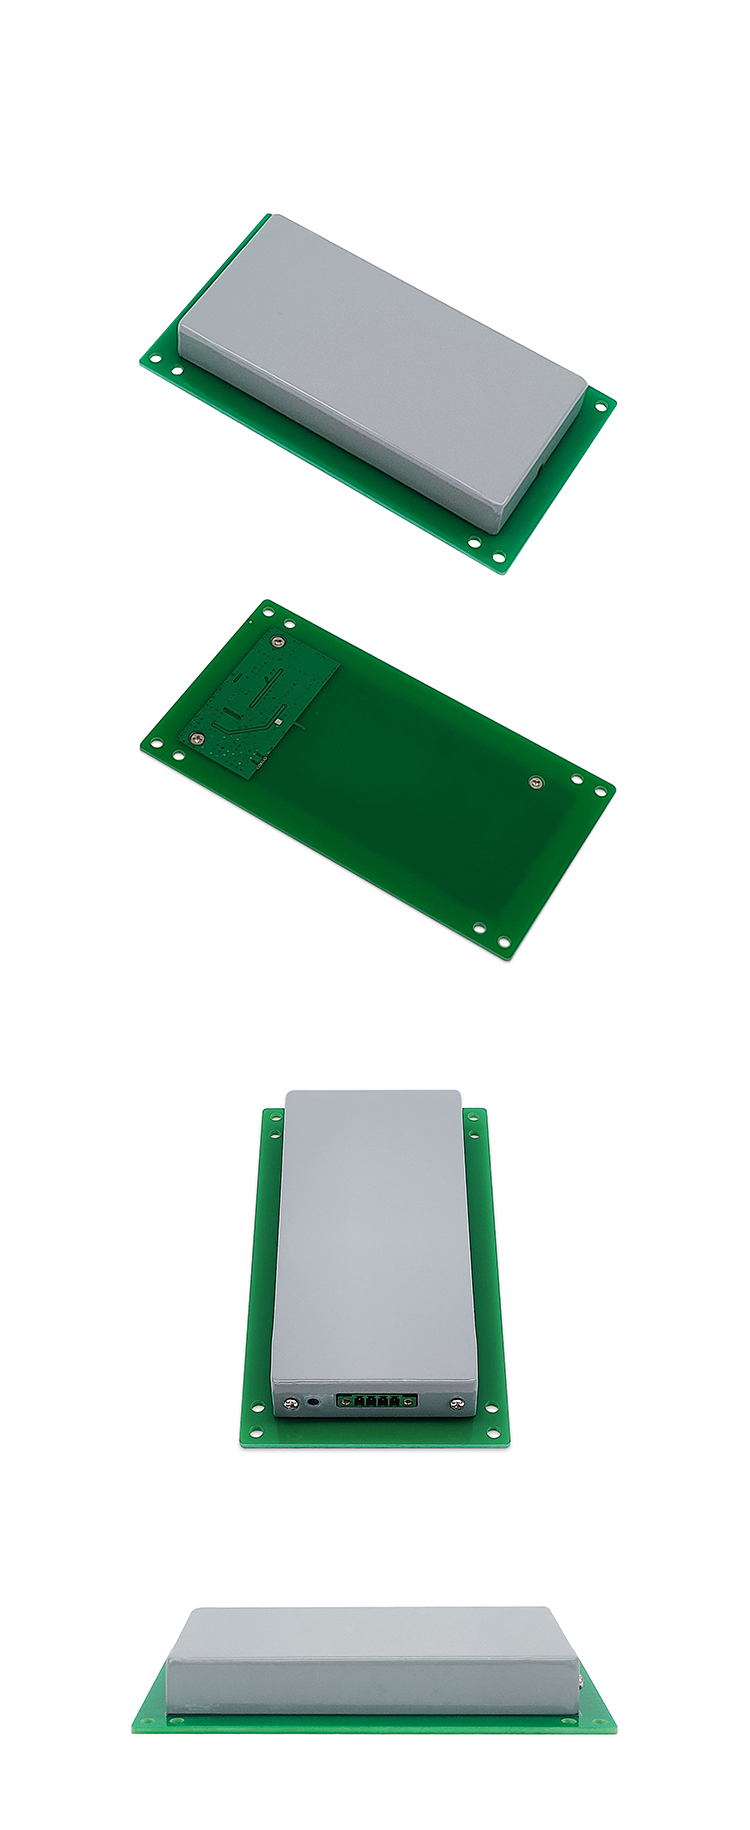 Shielded Anti Collision RFID Reader , ISO14443A /B ISO18000 - 3Mode3 ISO 15693 RFID Embedded Reader